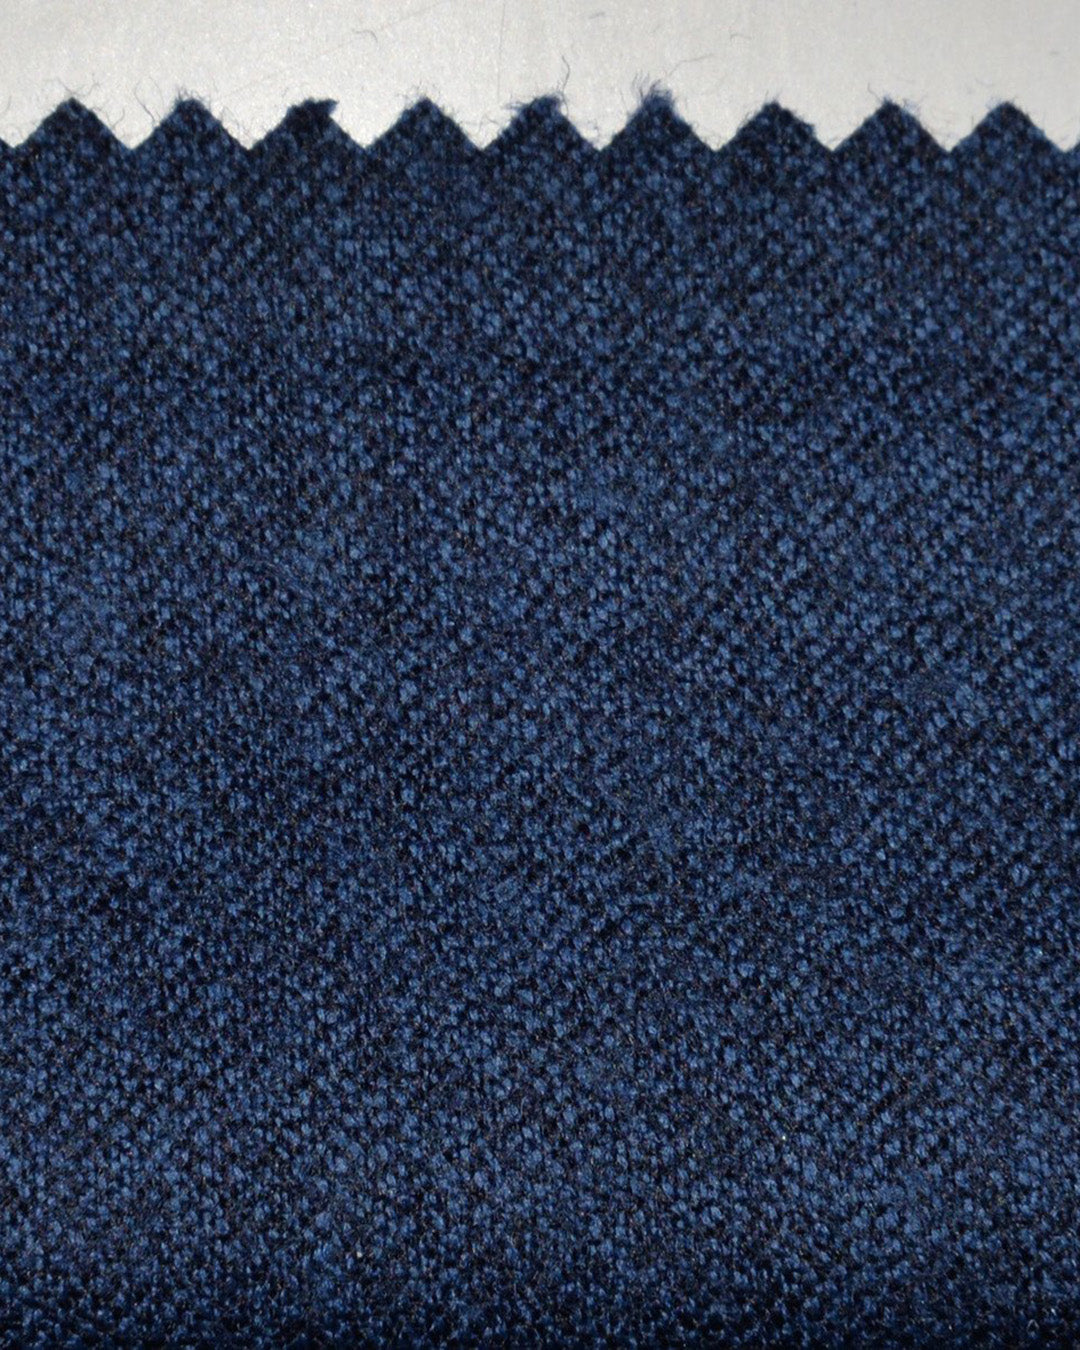 Holland Sherry Classic Worsted Flannel Blue Sprinkle Wth Black